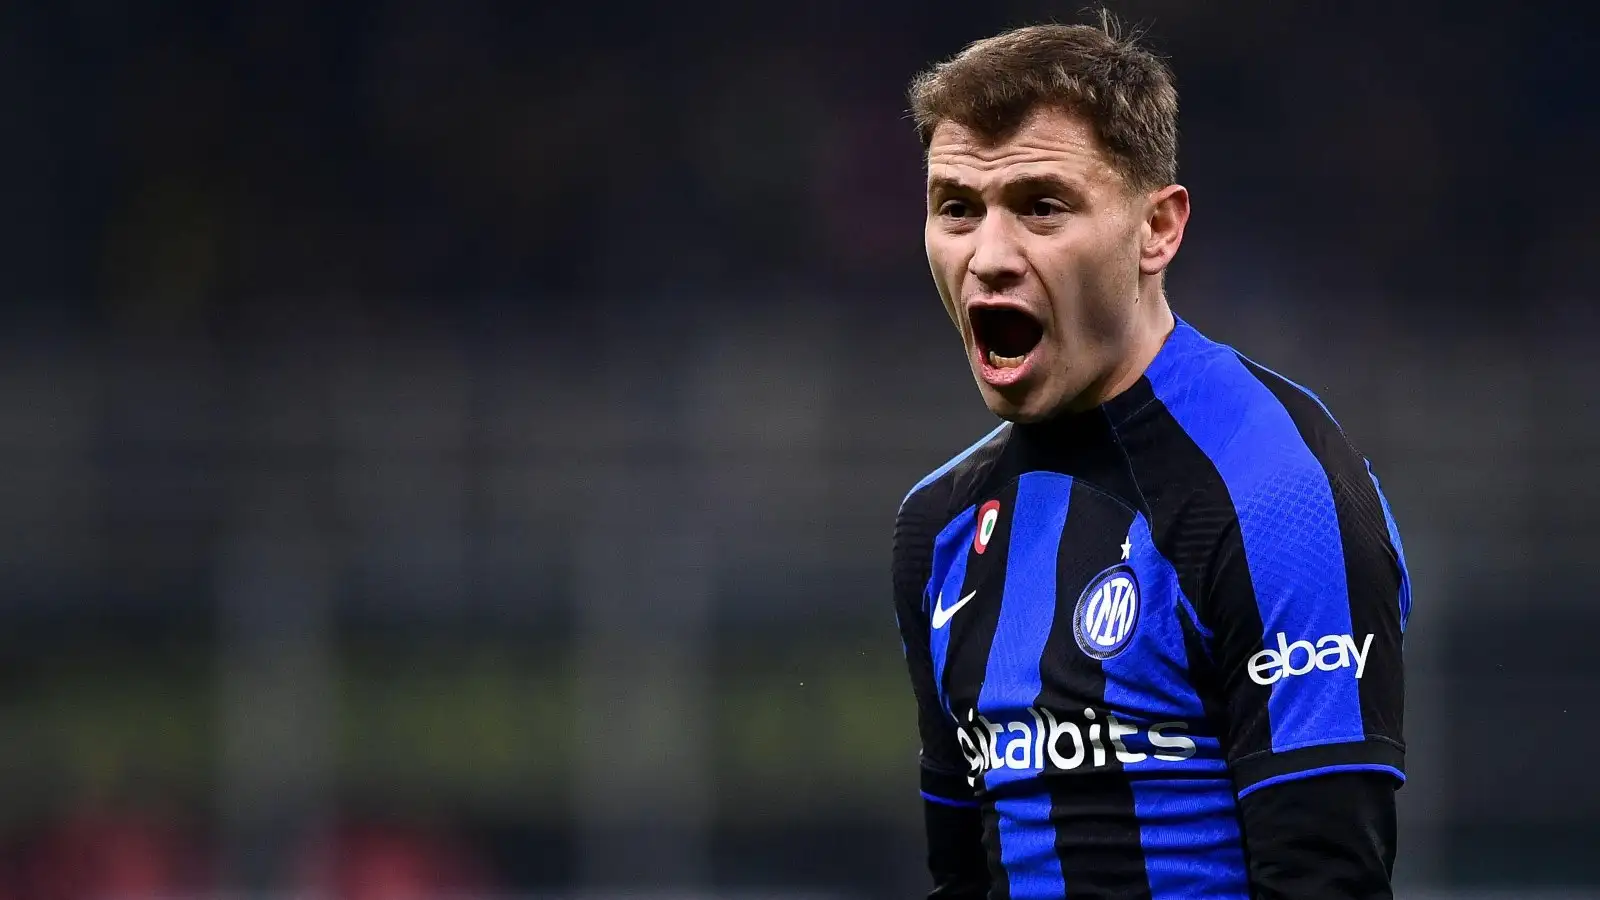 Reported Liverpool target Nicolo Barella shouts during a match